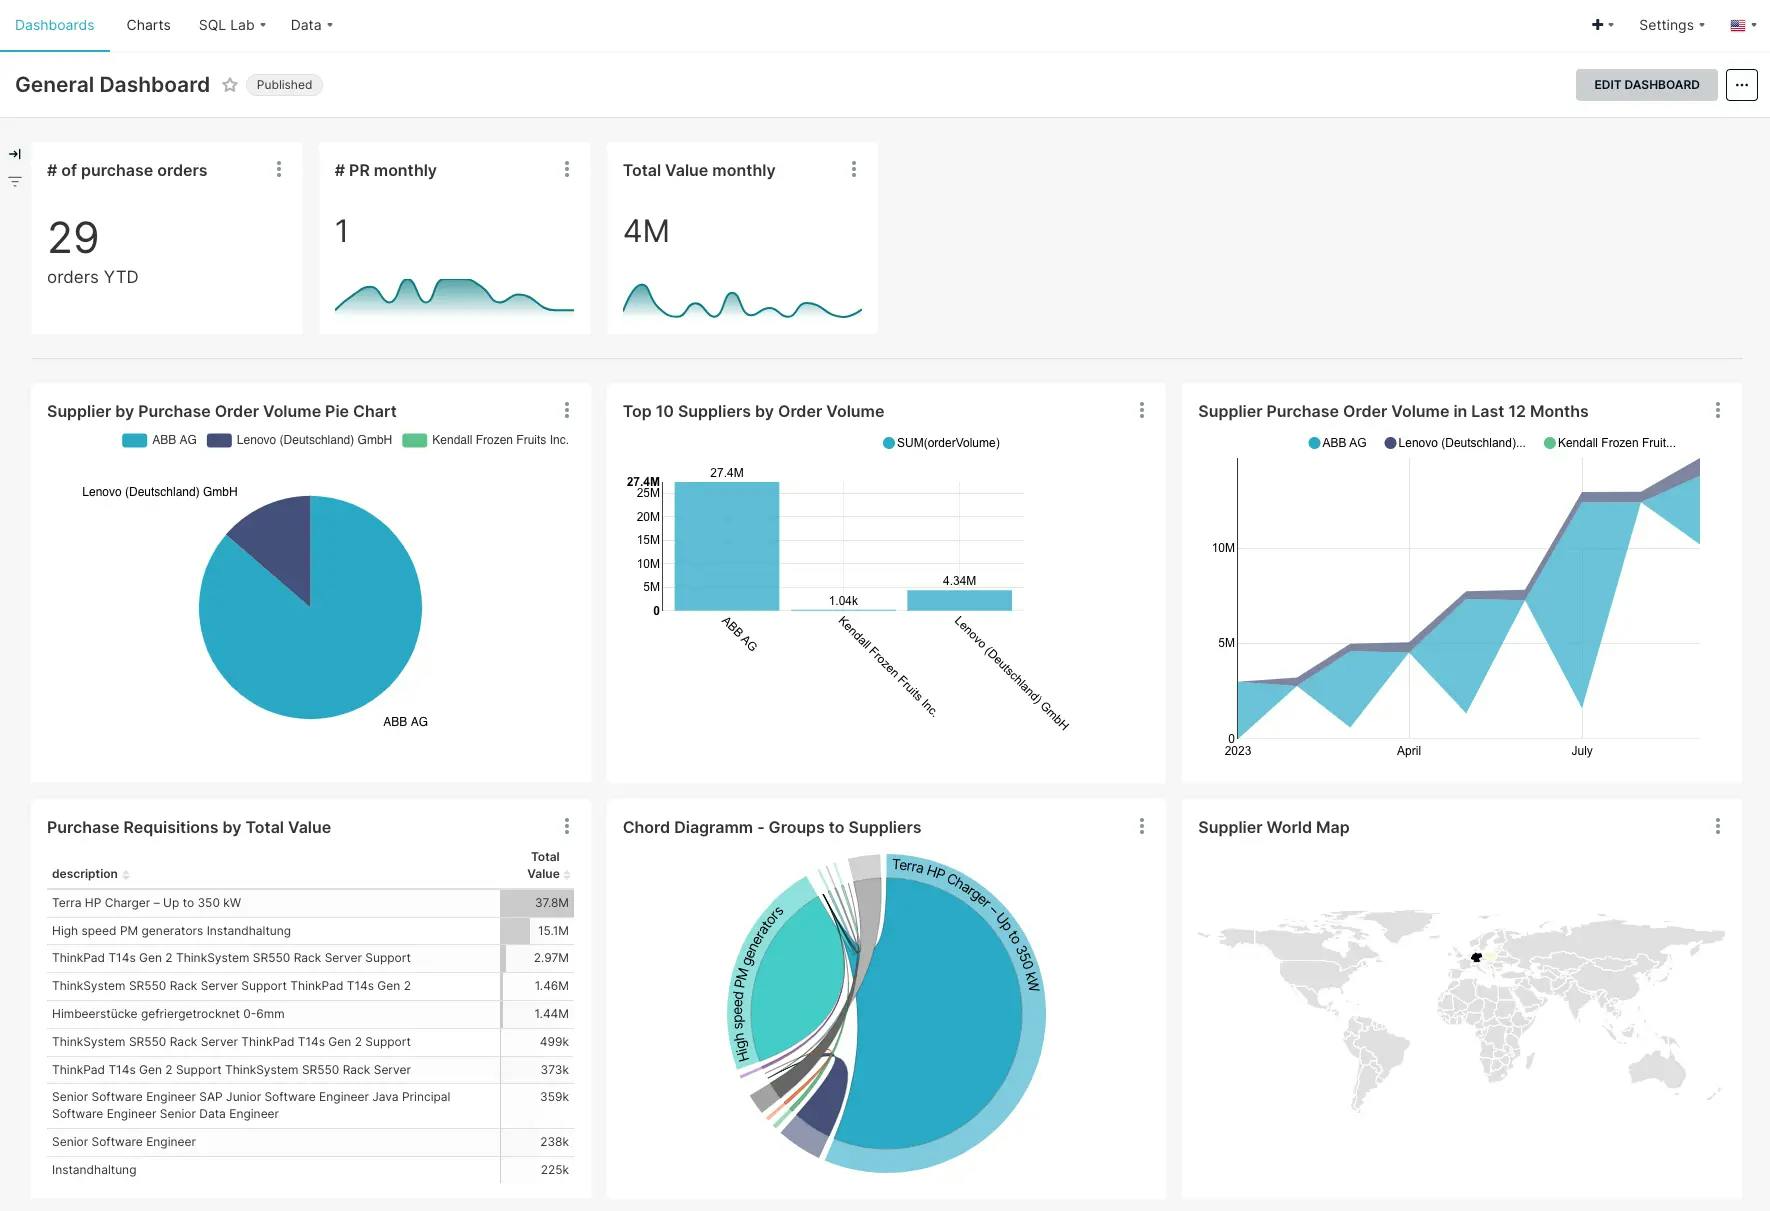 I integrated apache-superset dashboards into the main app.